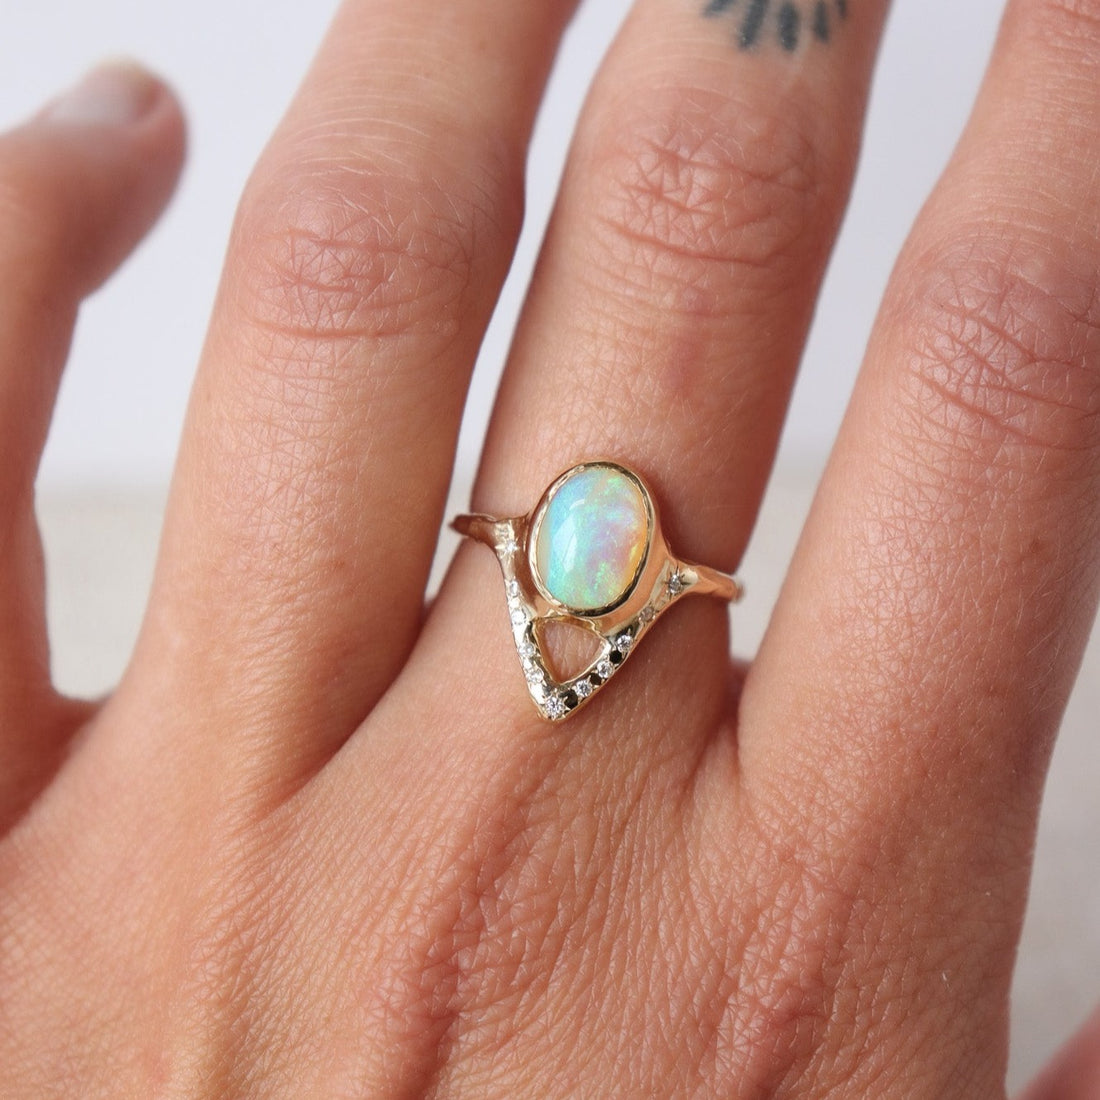 Elegant opal ring featuring a V-shaped design adorned with sparkling diamond accents, shown on a finger for scale